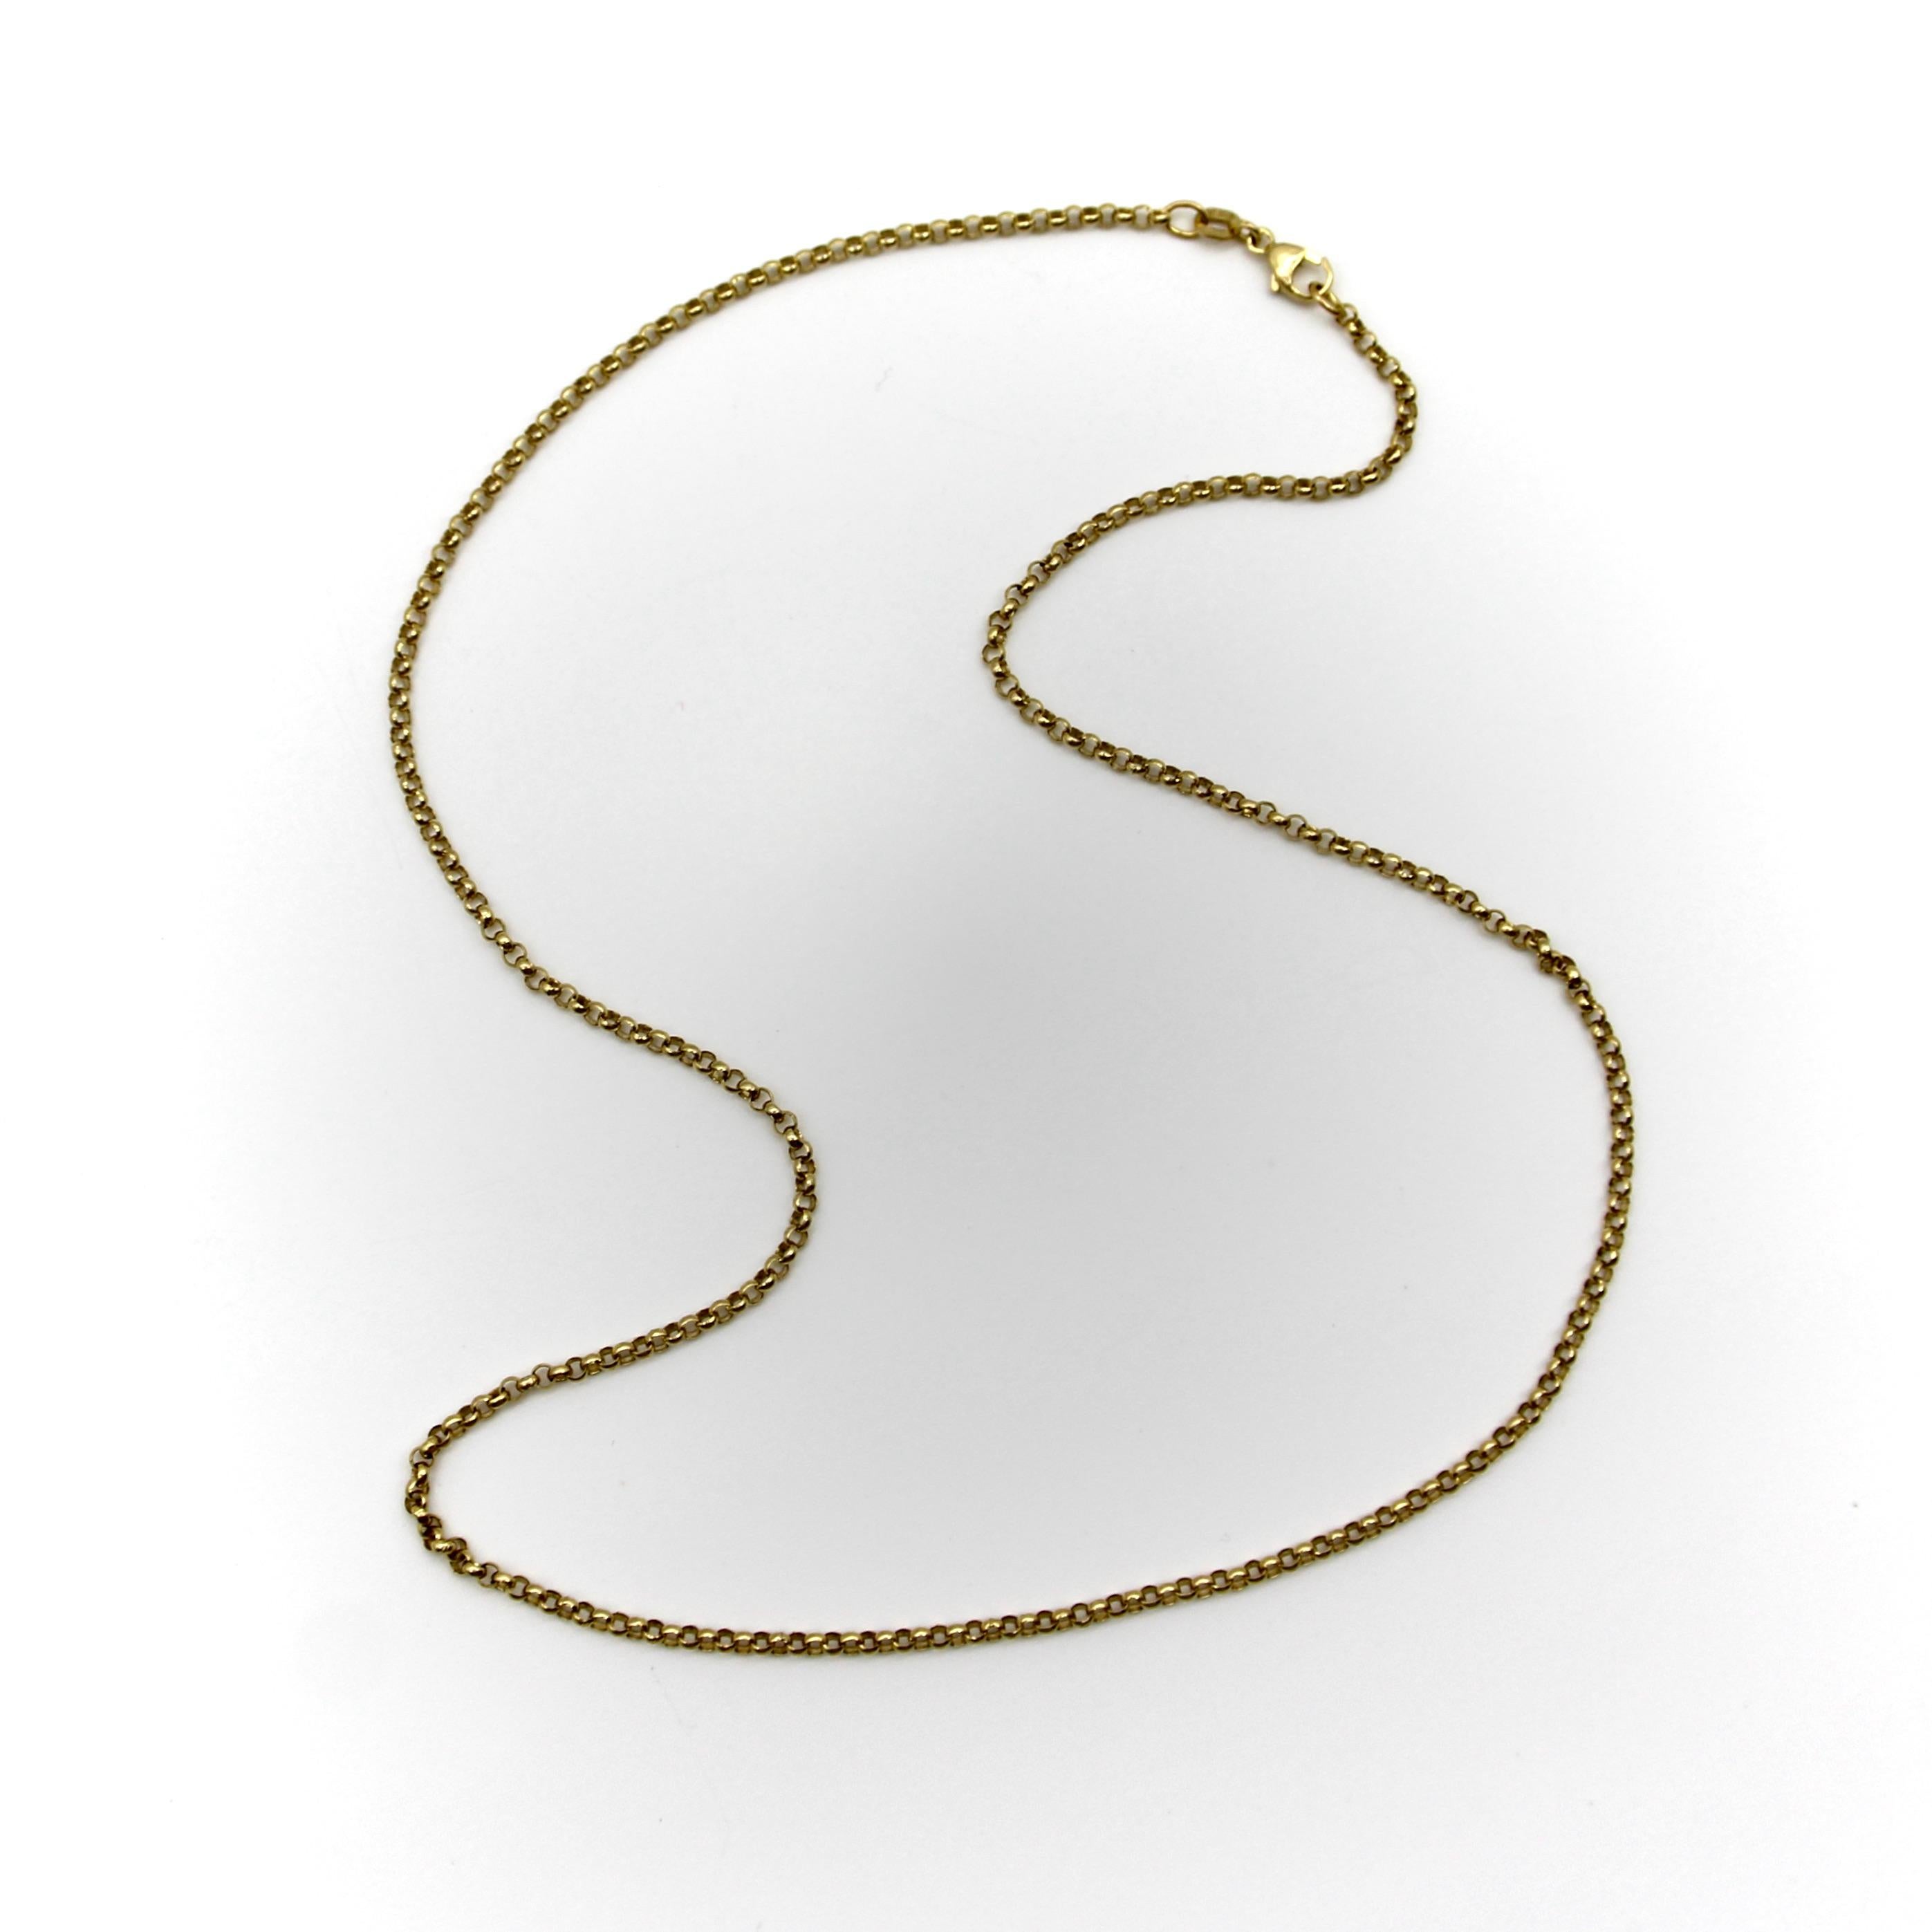 Circa the 1980’s, this 14k gold belcher link chain is a staple in any jewelry collection. The circular links catch the light and have beautiful visual texture—great with a pendant or worn alone. This is a vintage piece, yet is reminiscent of a